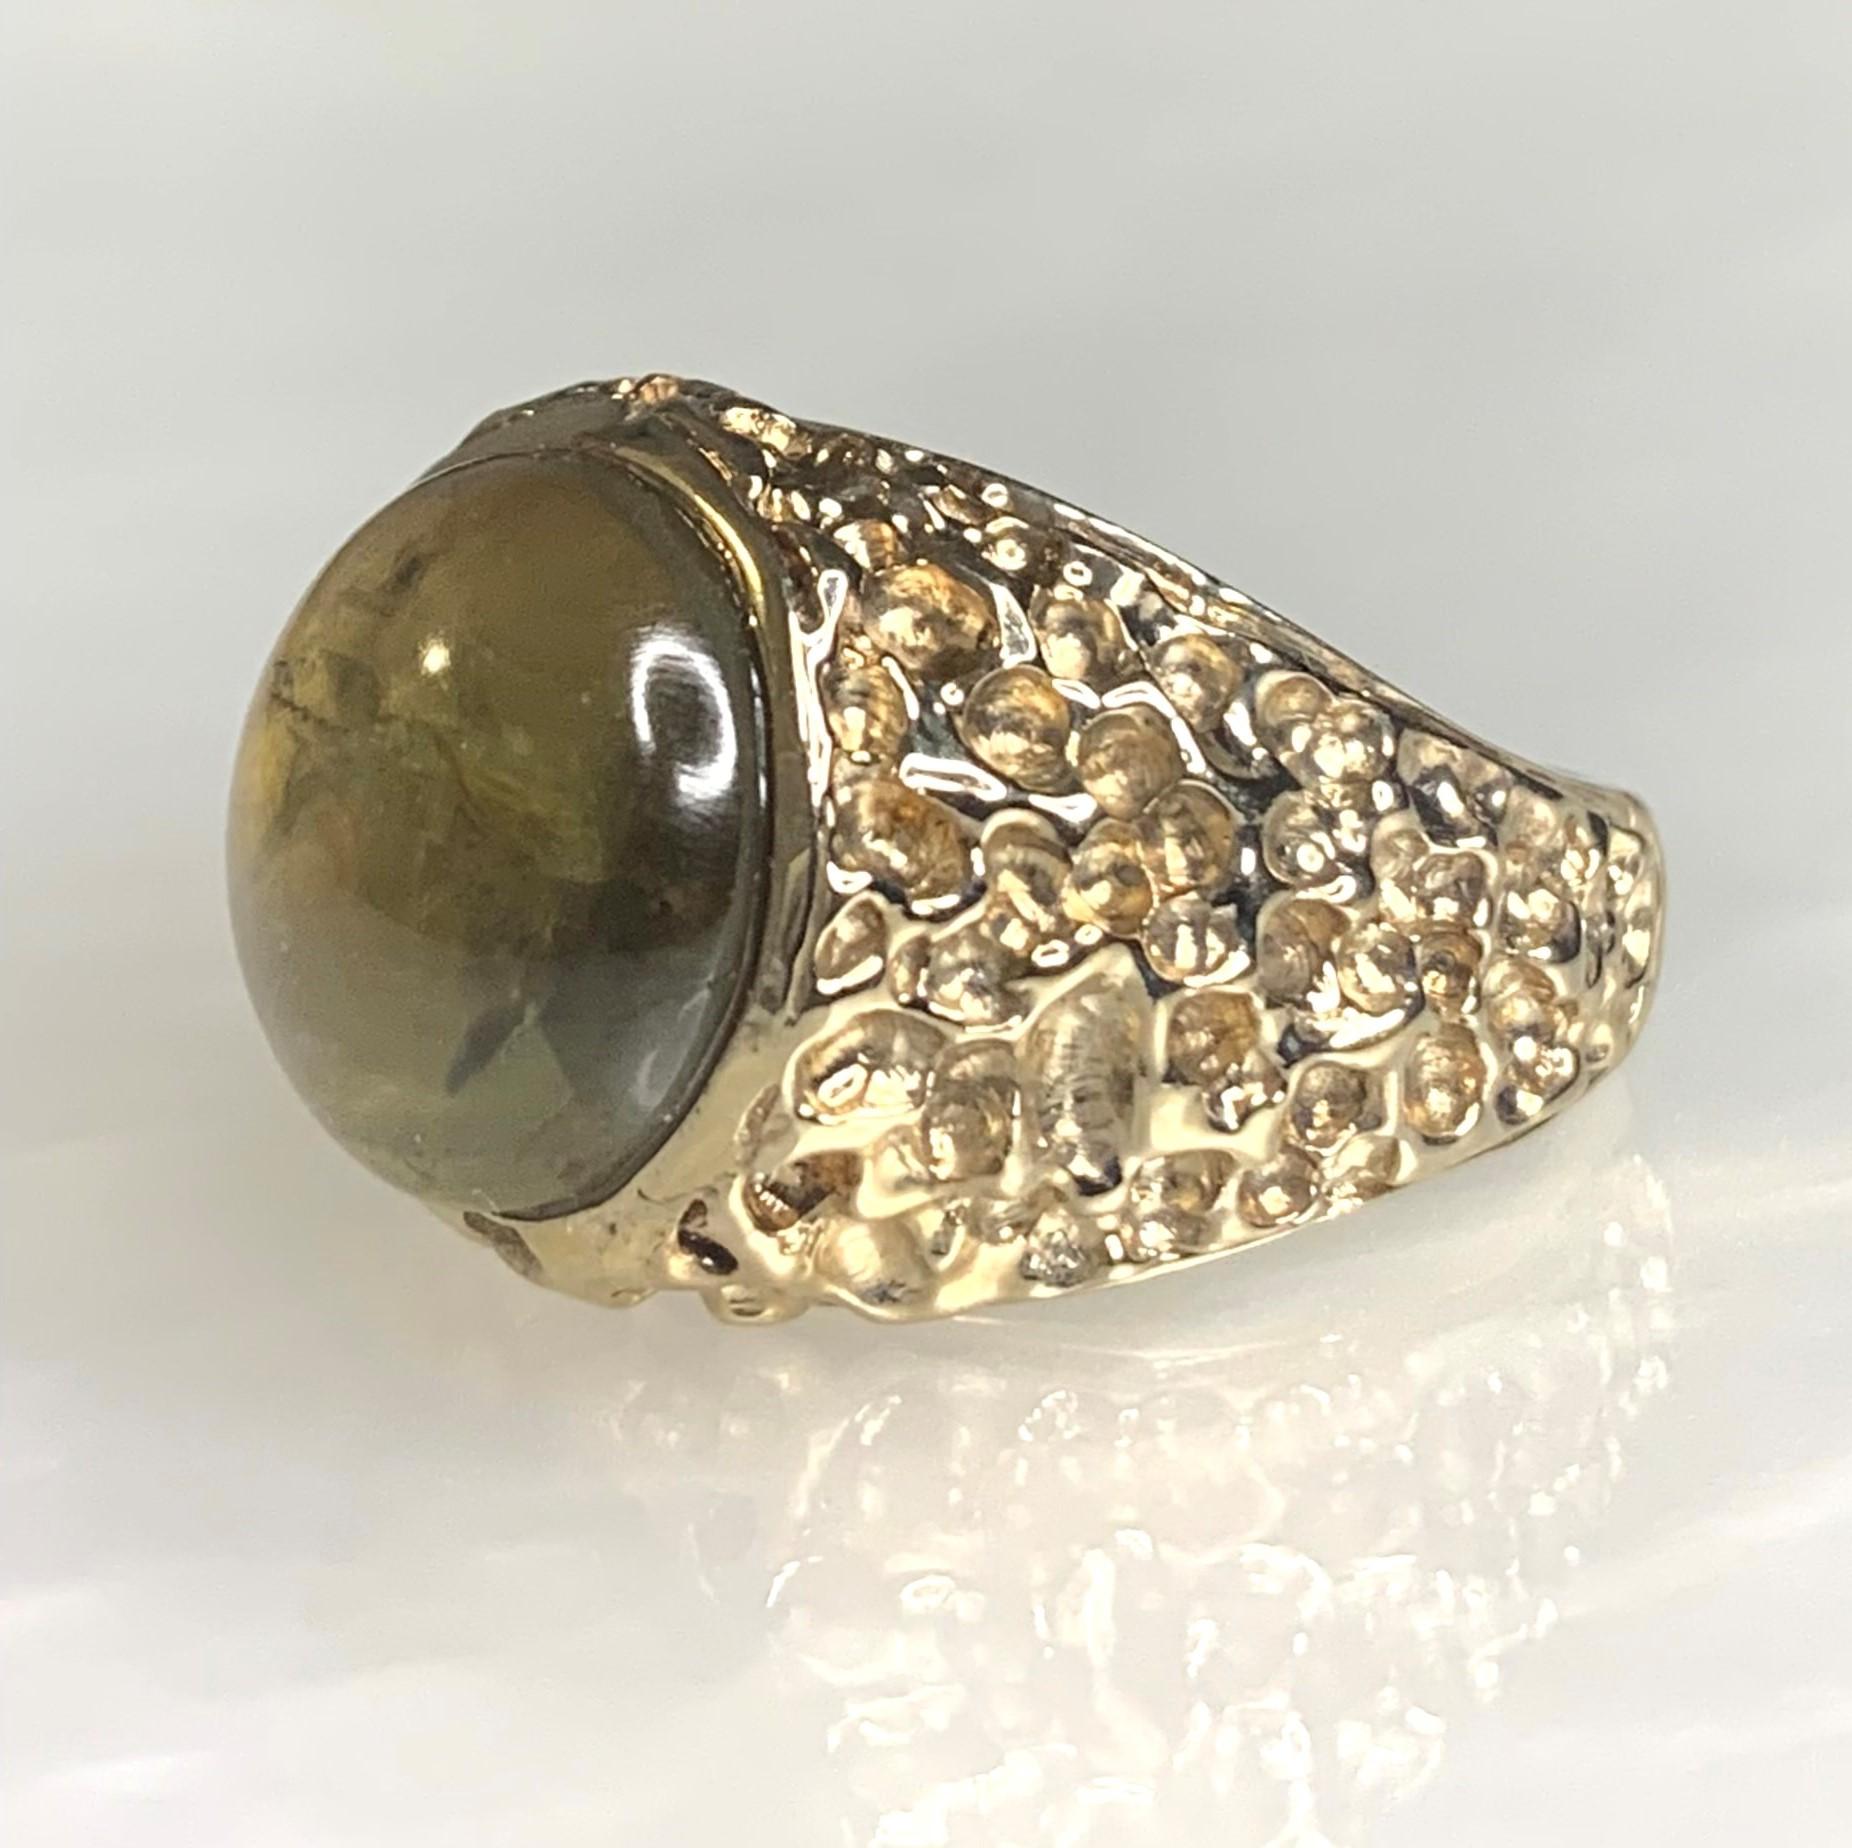 A noticeable and unusual vintage Cat's Eye ring featuring a cabochon cut 14.86 carat center stone secured by a bezel setting surrounded by intricately detailed solid 18k yellow gold.

*Approximate Stone Dimensions: 13mm all around

*Approximate ring